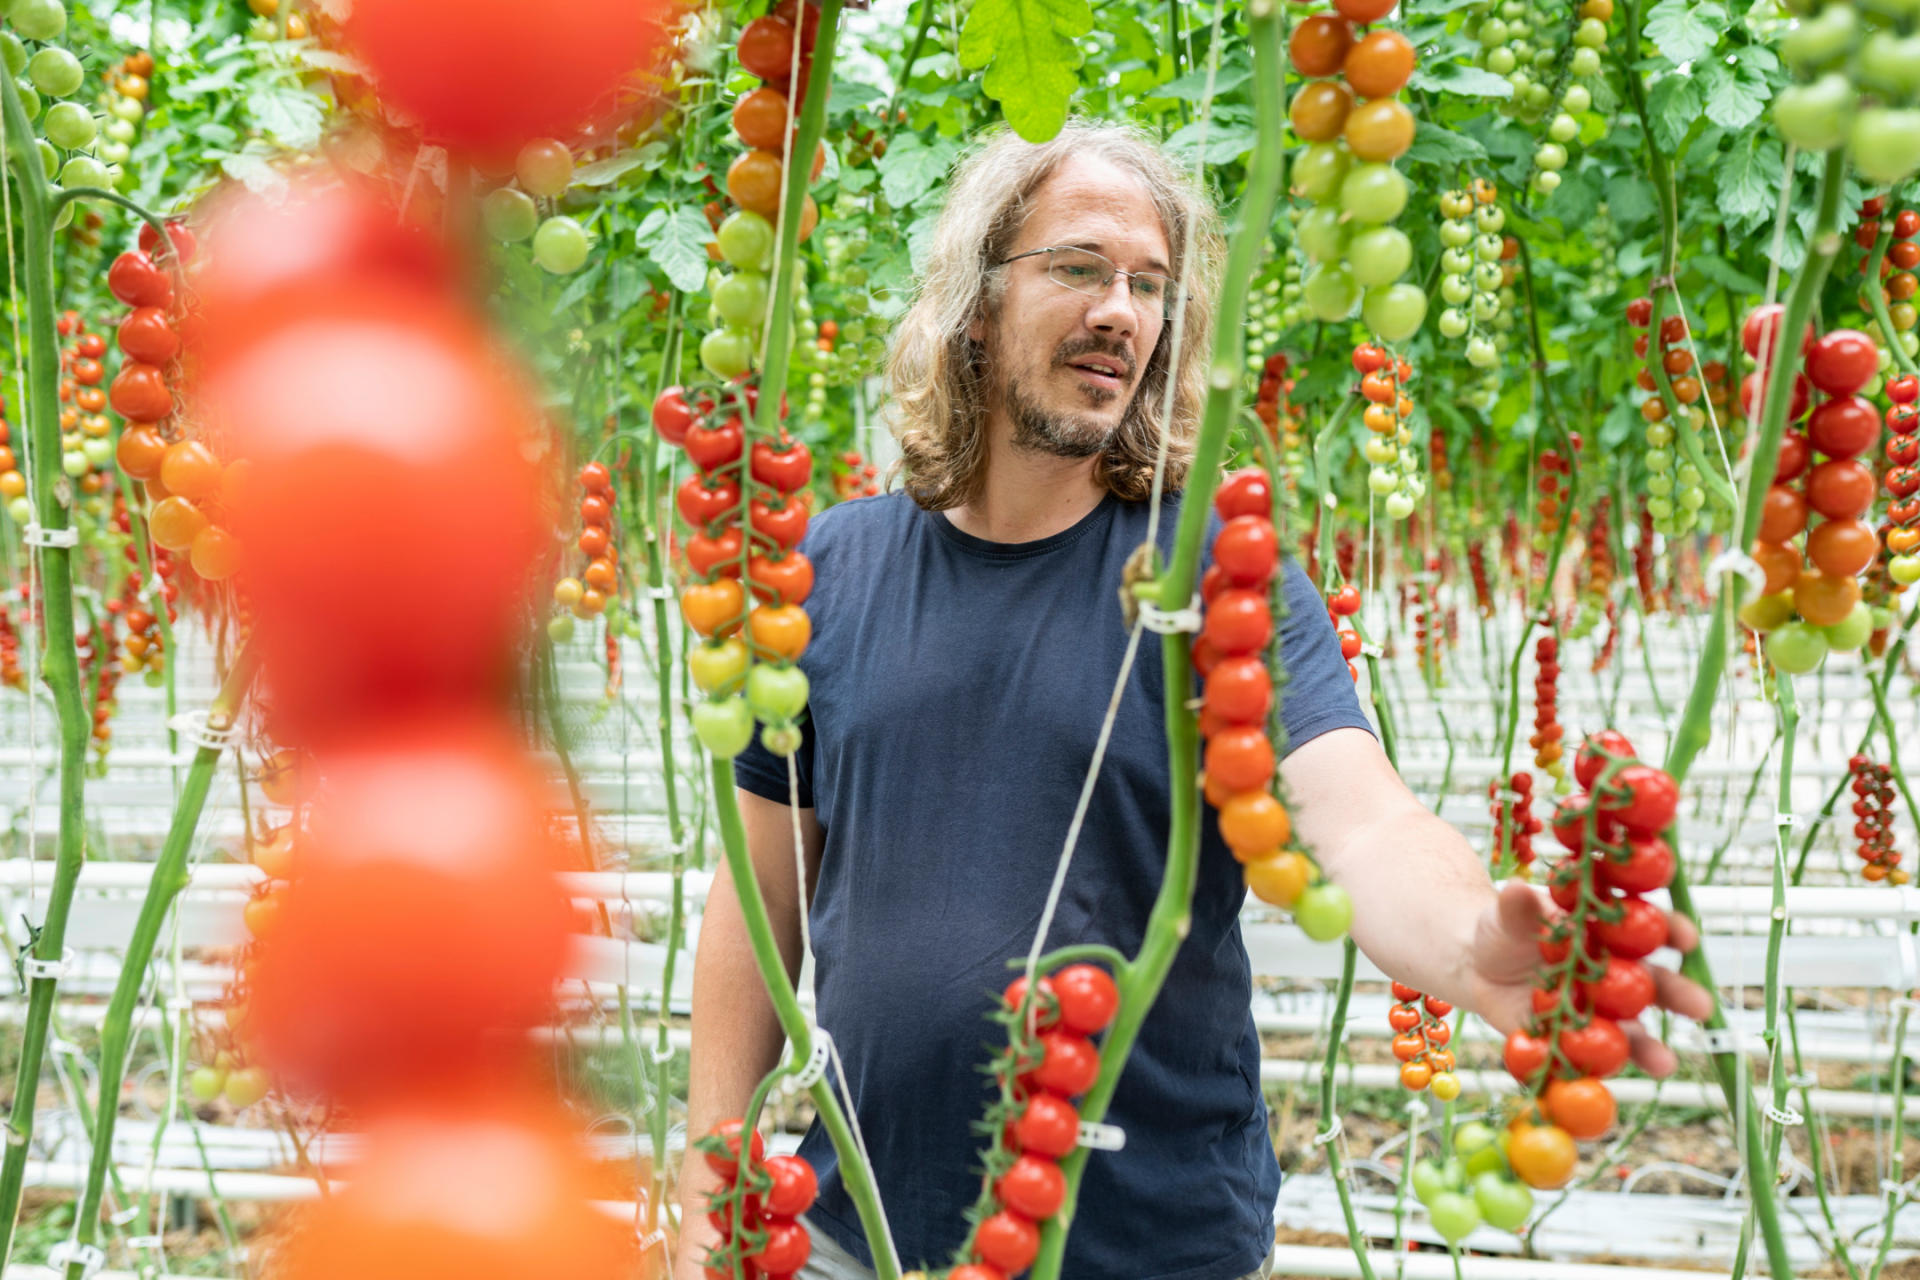 René Sgier, Operations Manager at Imhofbio AG, between cherry tomatoes hanging from vines